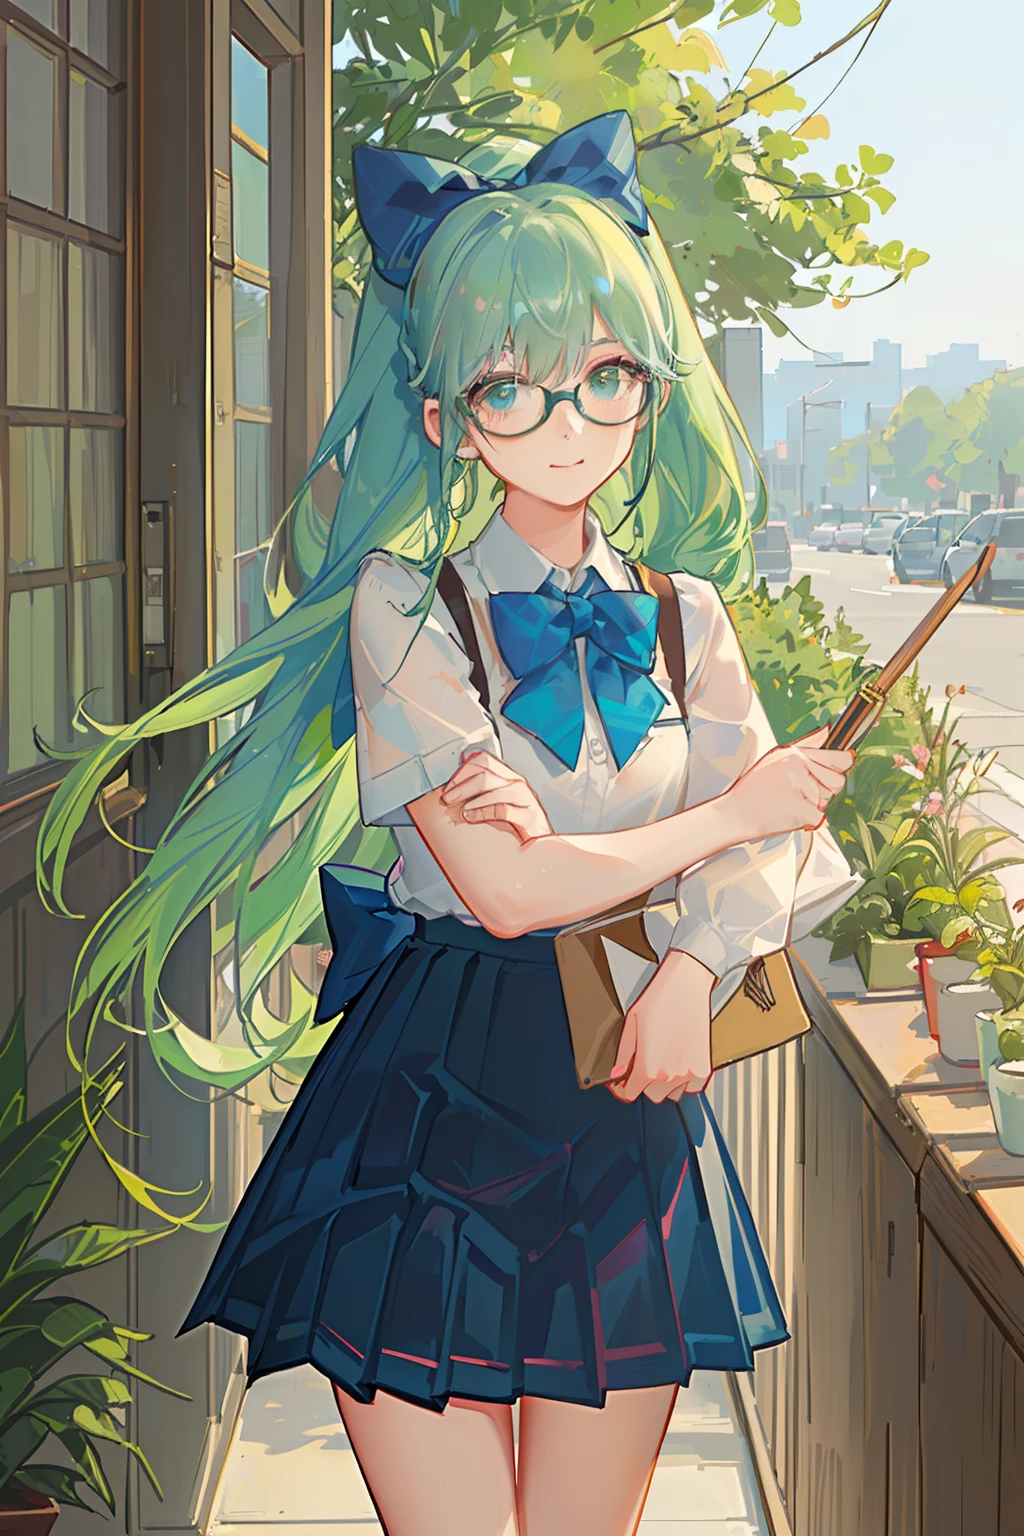 4K, best quality, 1 girl, 18 years old, light green hair, double Fried Dough Twists braids, Fried Dough Twists braids tied behind both ears, dark blue bow tie. Deep blue pleated skirt, strap on skirt, glasses, vitality, vitality, girl, campus, in the campus